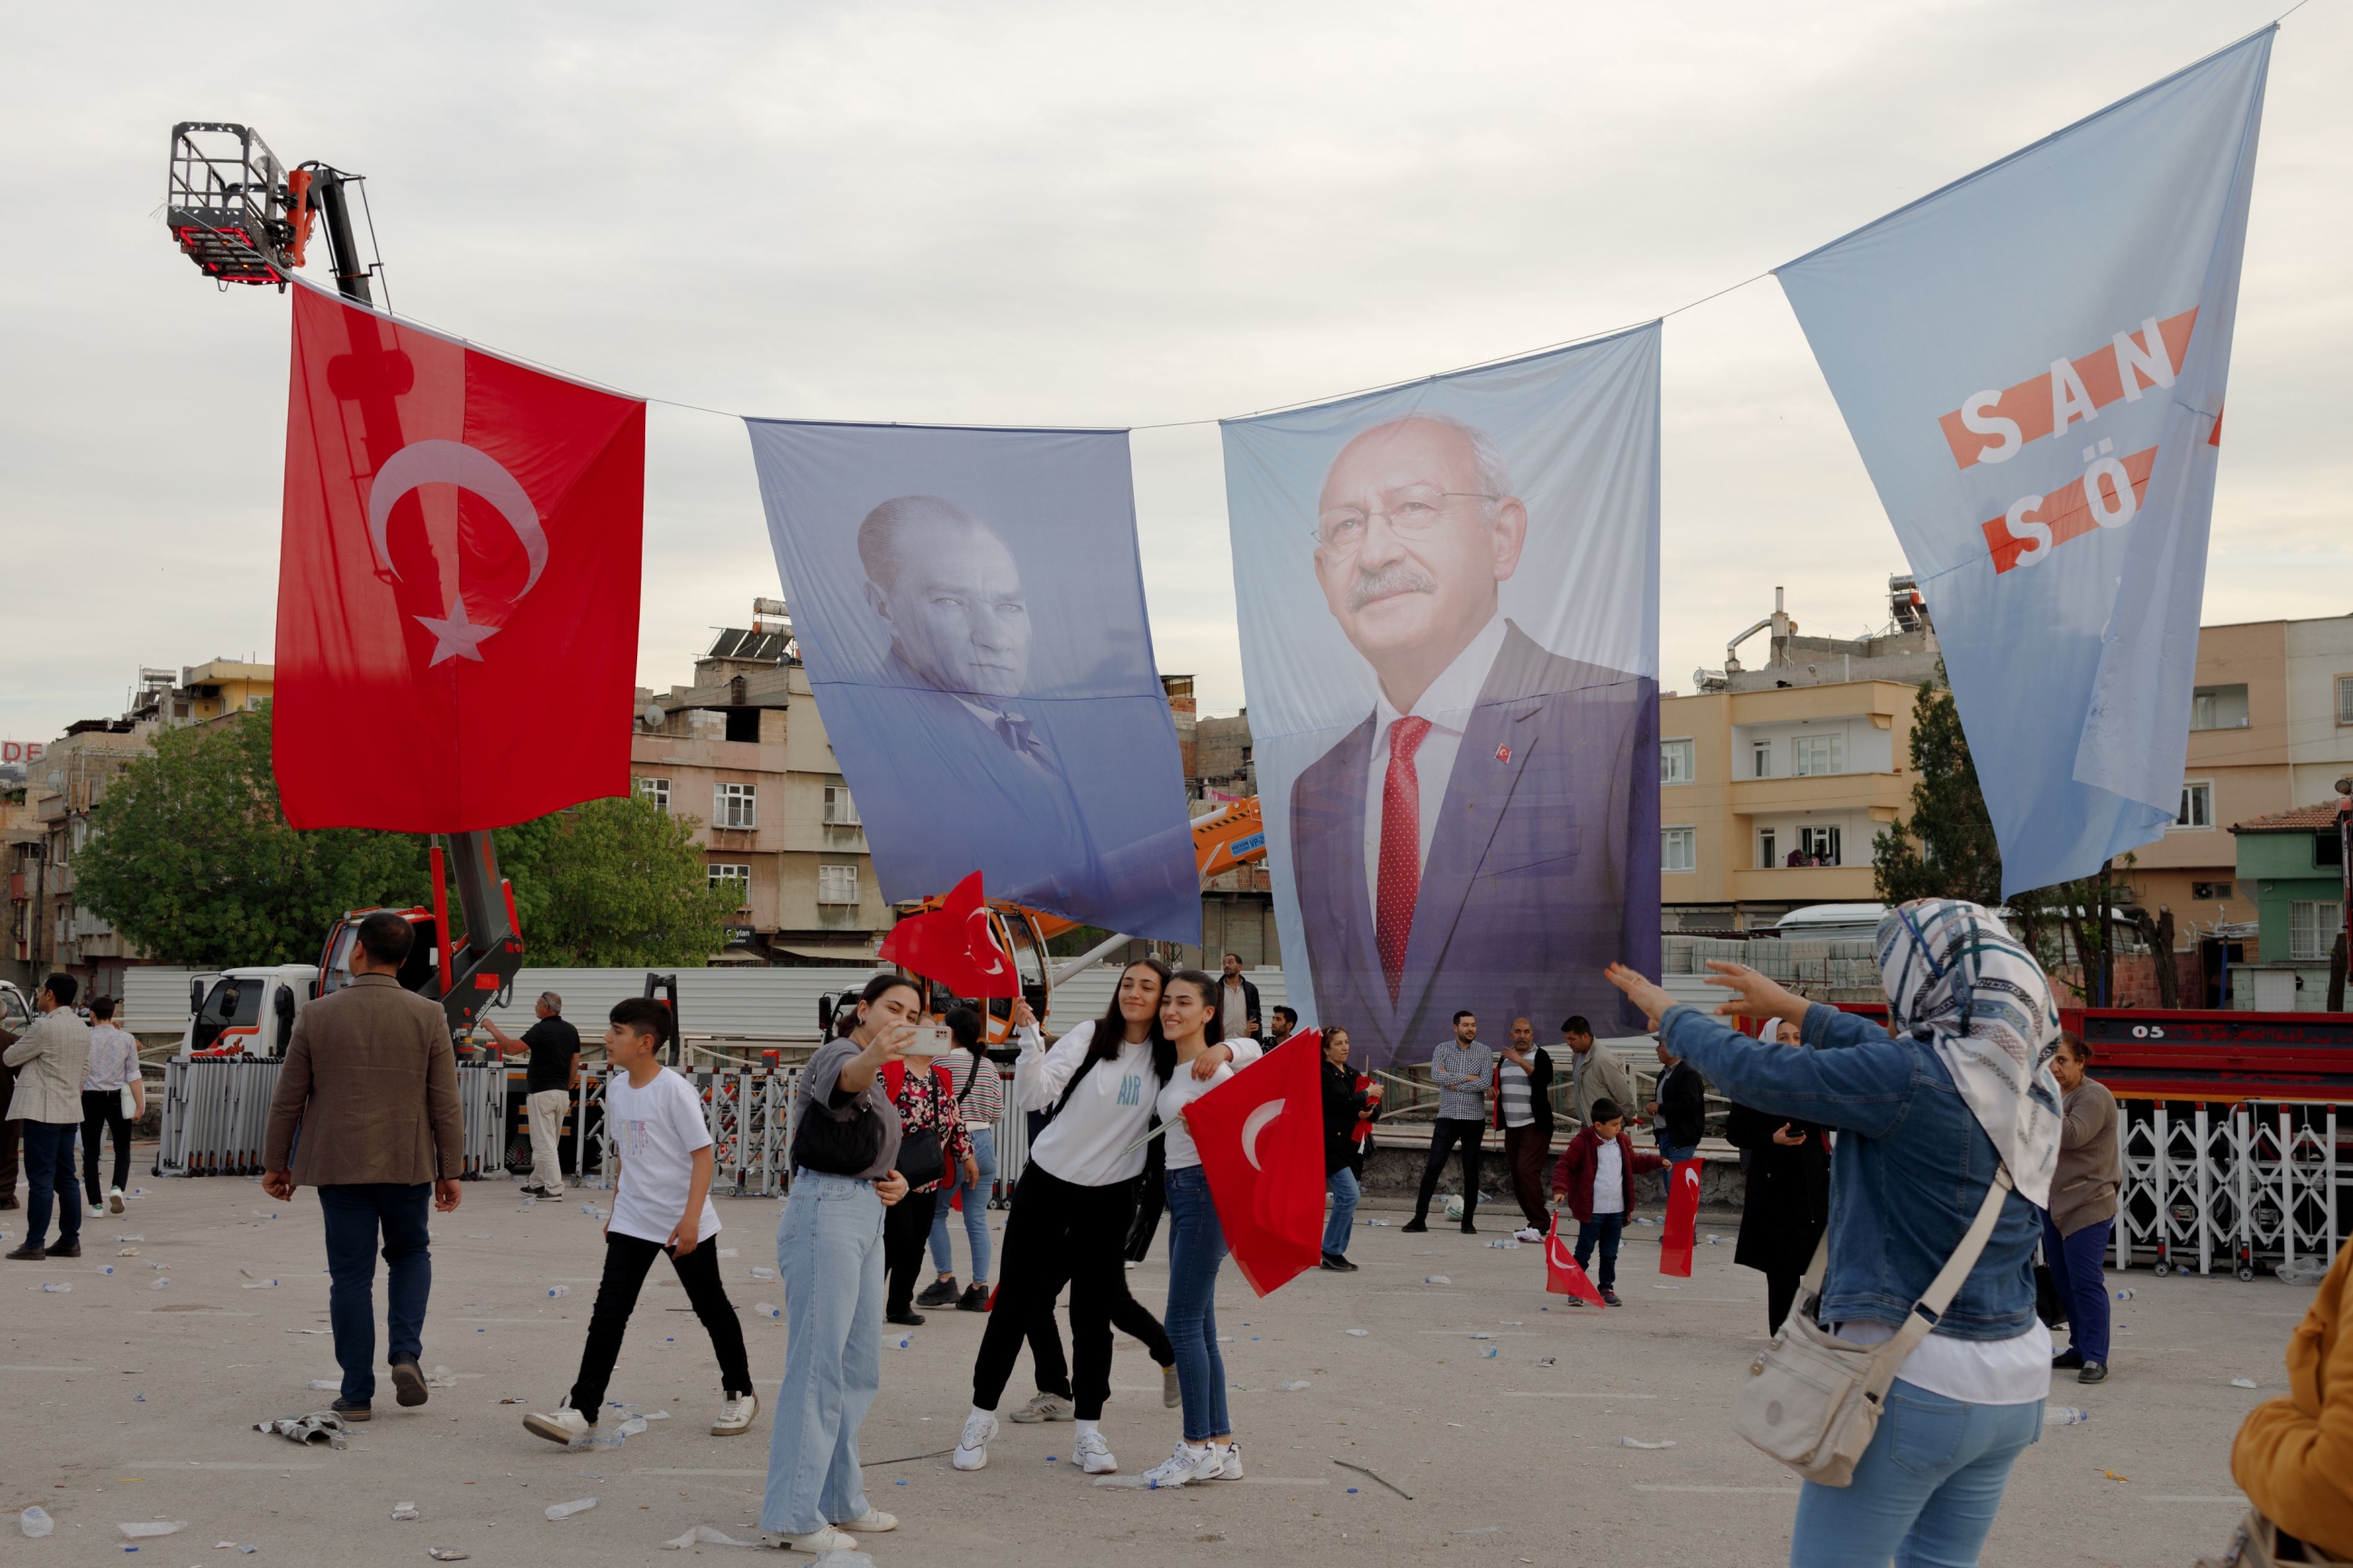 Supporters of the main opposition Republican People's Party's (CHP) gather in Gaziantep’s Cakmak District during a rally held by Istanbul Mayor Ekrem İmamoglu, ahead of the upcoming Turkish general election, on April 26, 2023 (MEE/Carola Cappellari)